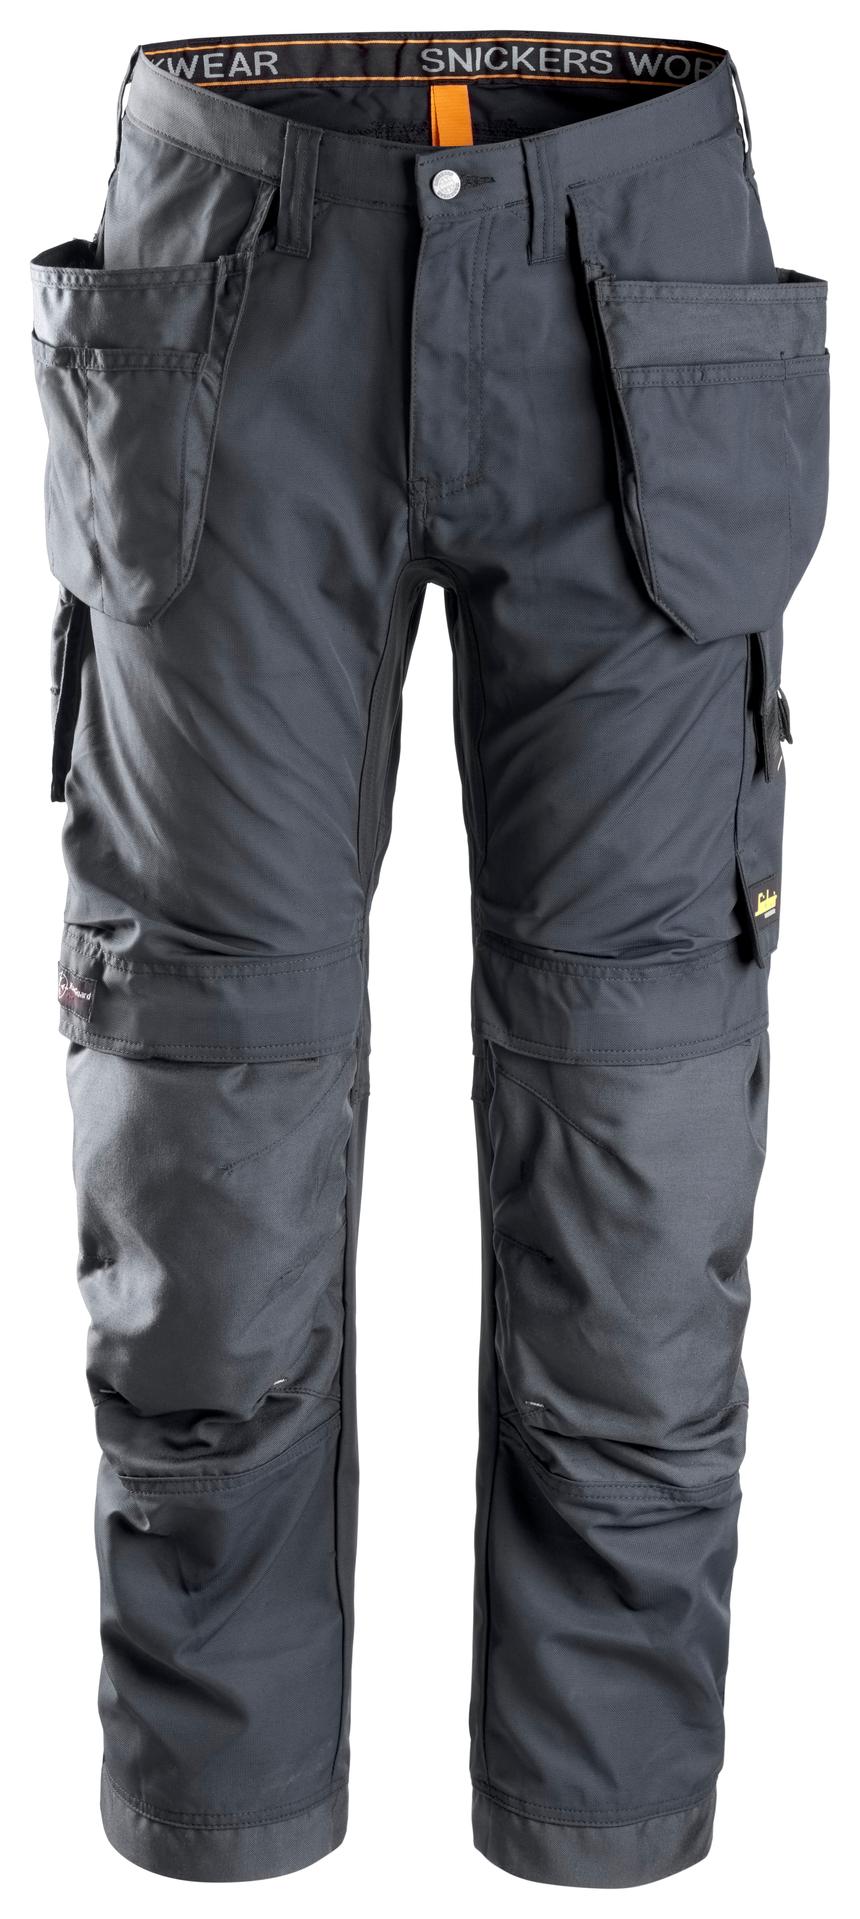 Snickers Workwear 6201 AllroundWork Pant + Holster Pockets - Steel Grey